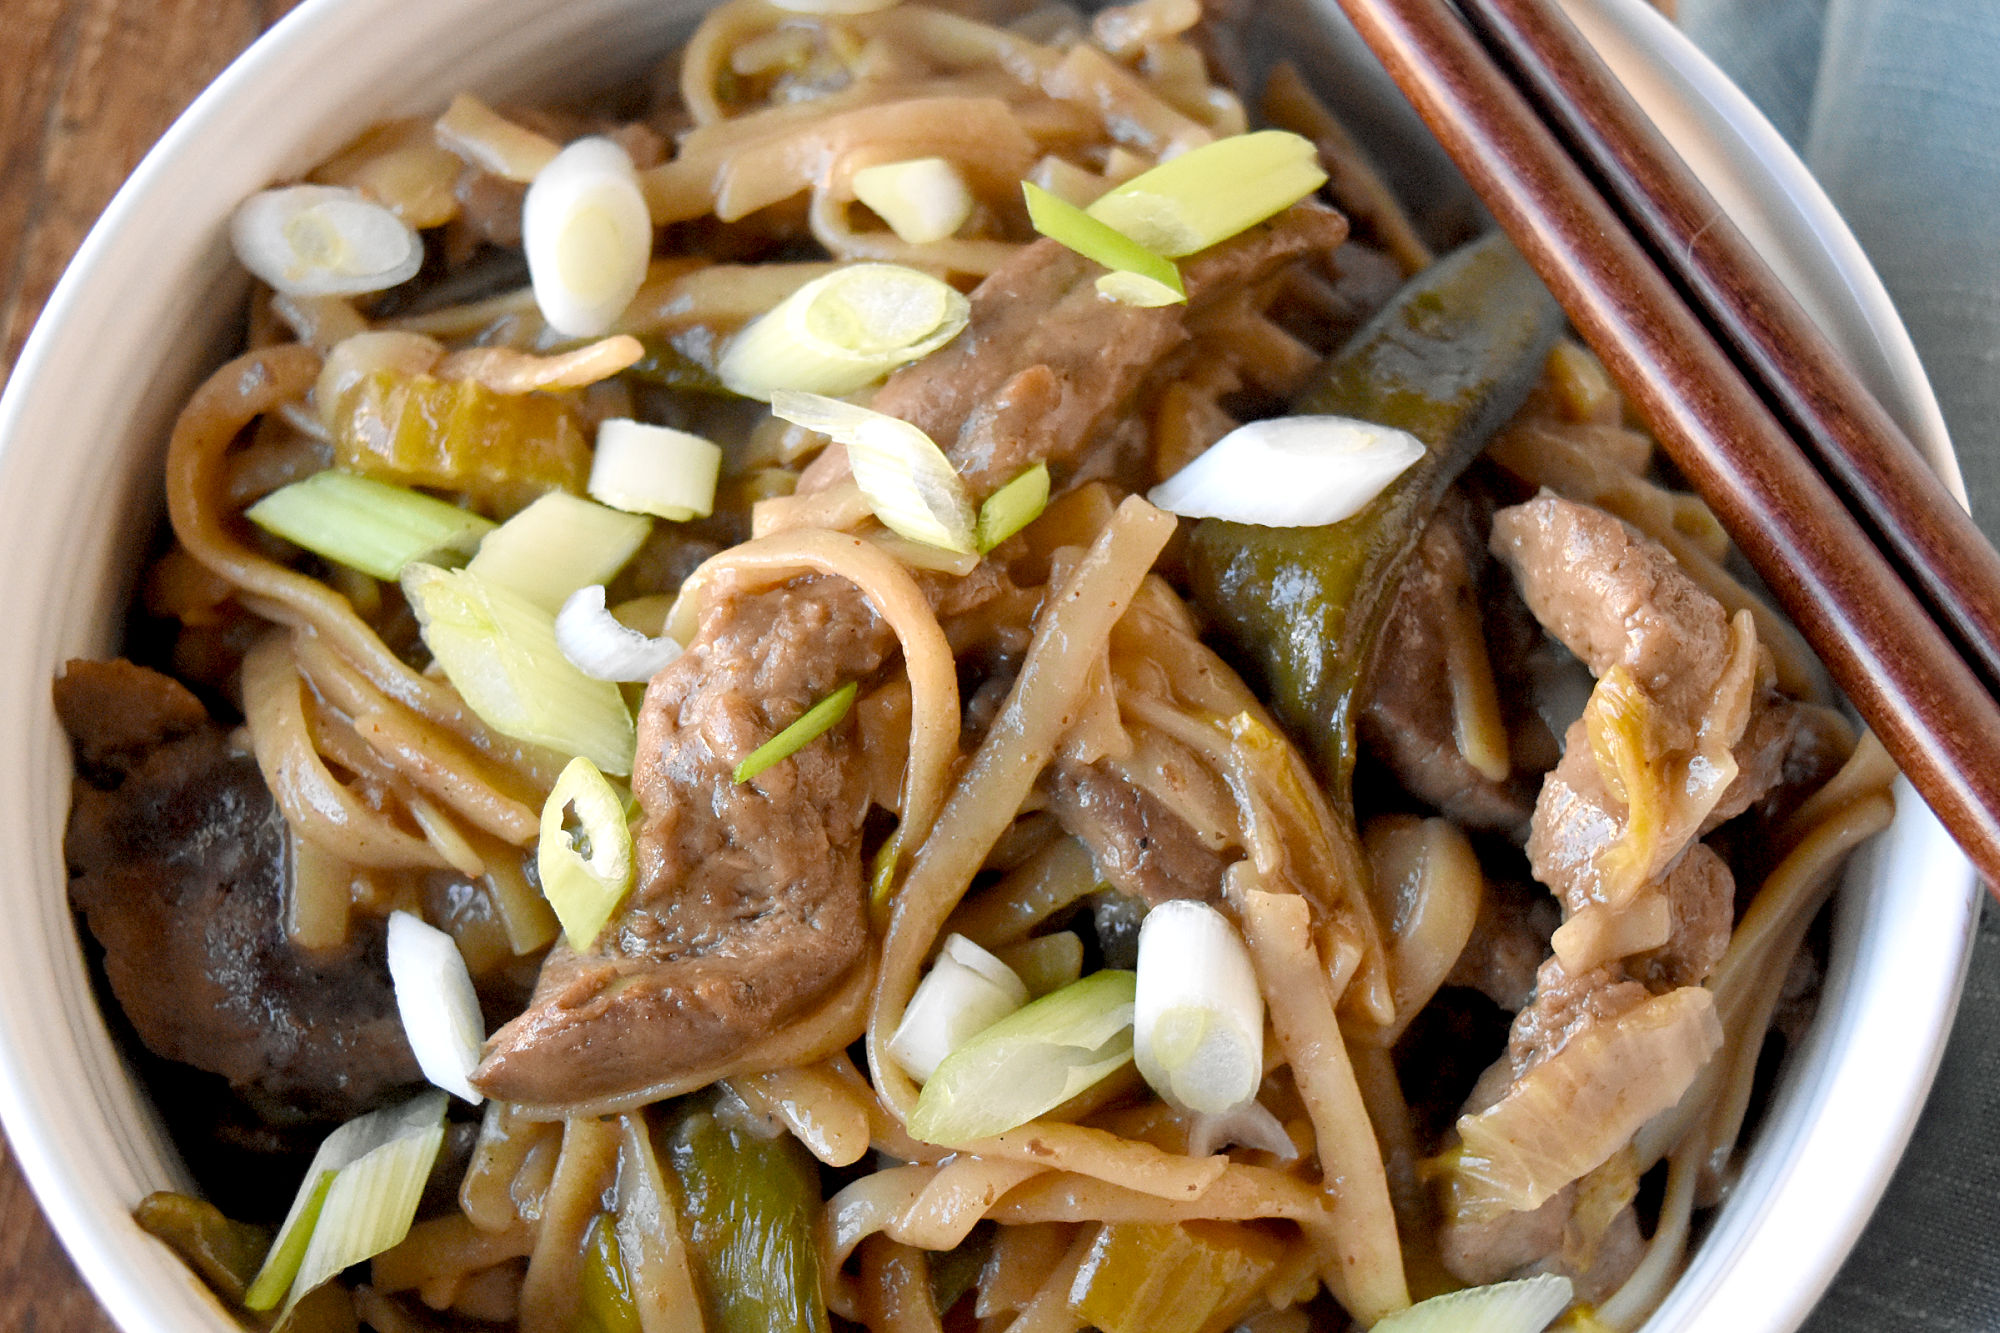 Korean BBQ Beef and Cabbage Stir-Fry is packed with sweet and spicy Korean barbecue flavor, crispy vegetables, and delicious rice noodles.  It’s gluten free and totally delicious. #kevinsrecipechallenge #KoreanBBQBeef #glutenfree